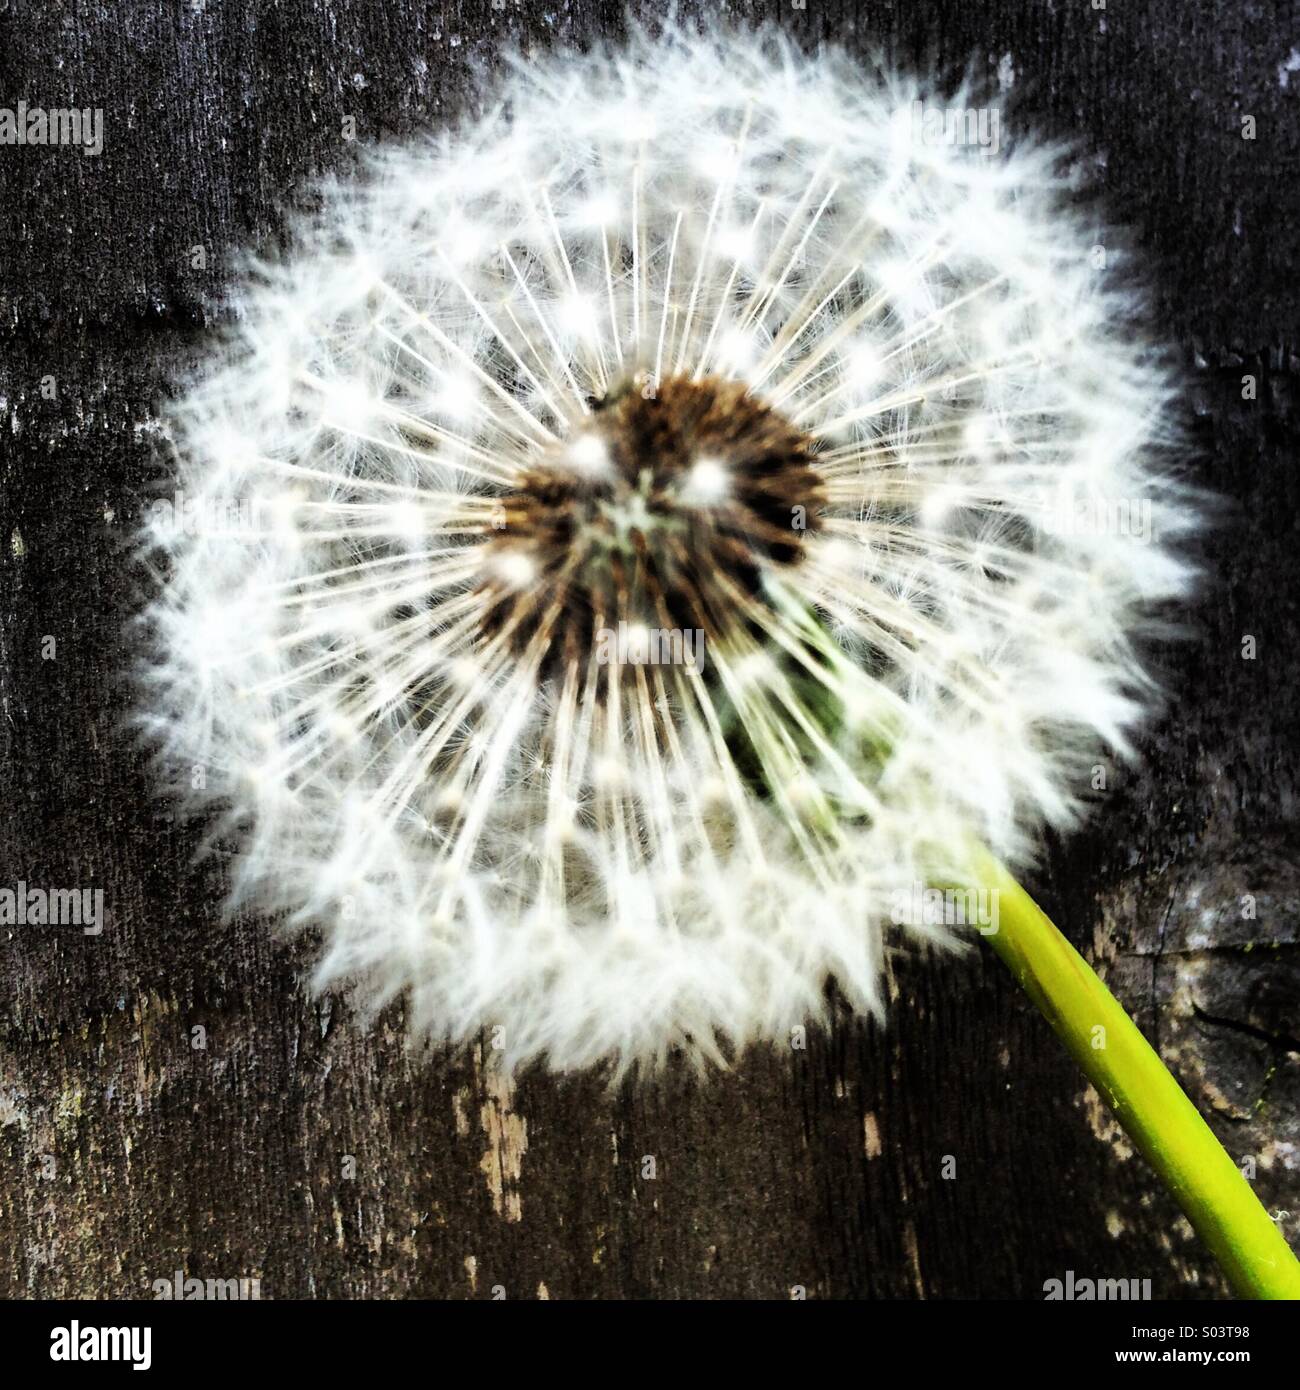 Close-up of a dandelion weed clock seed head. Stock Photo